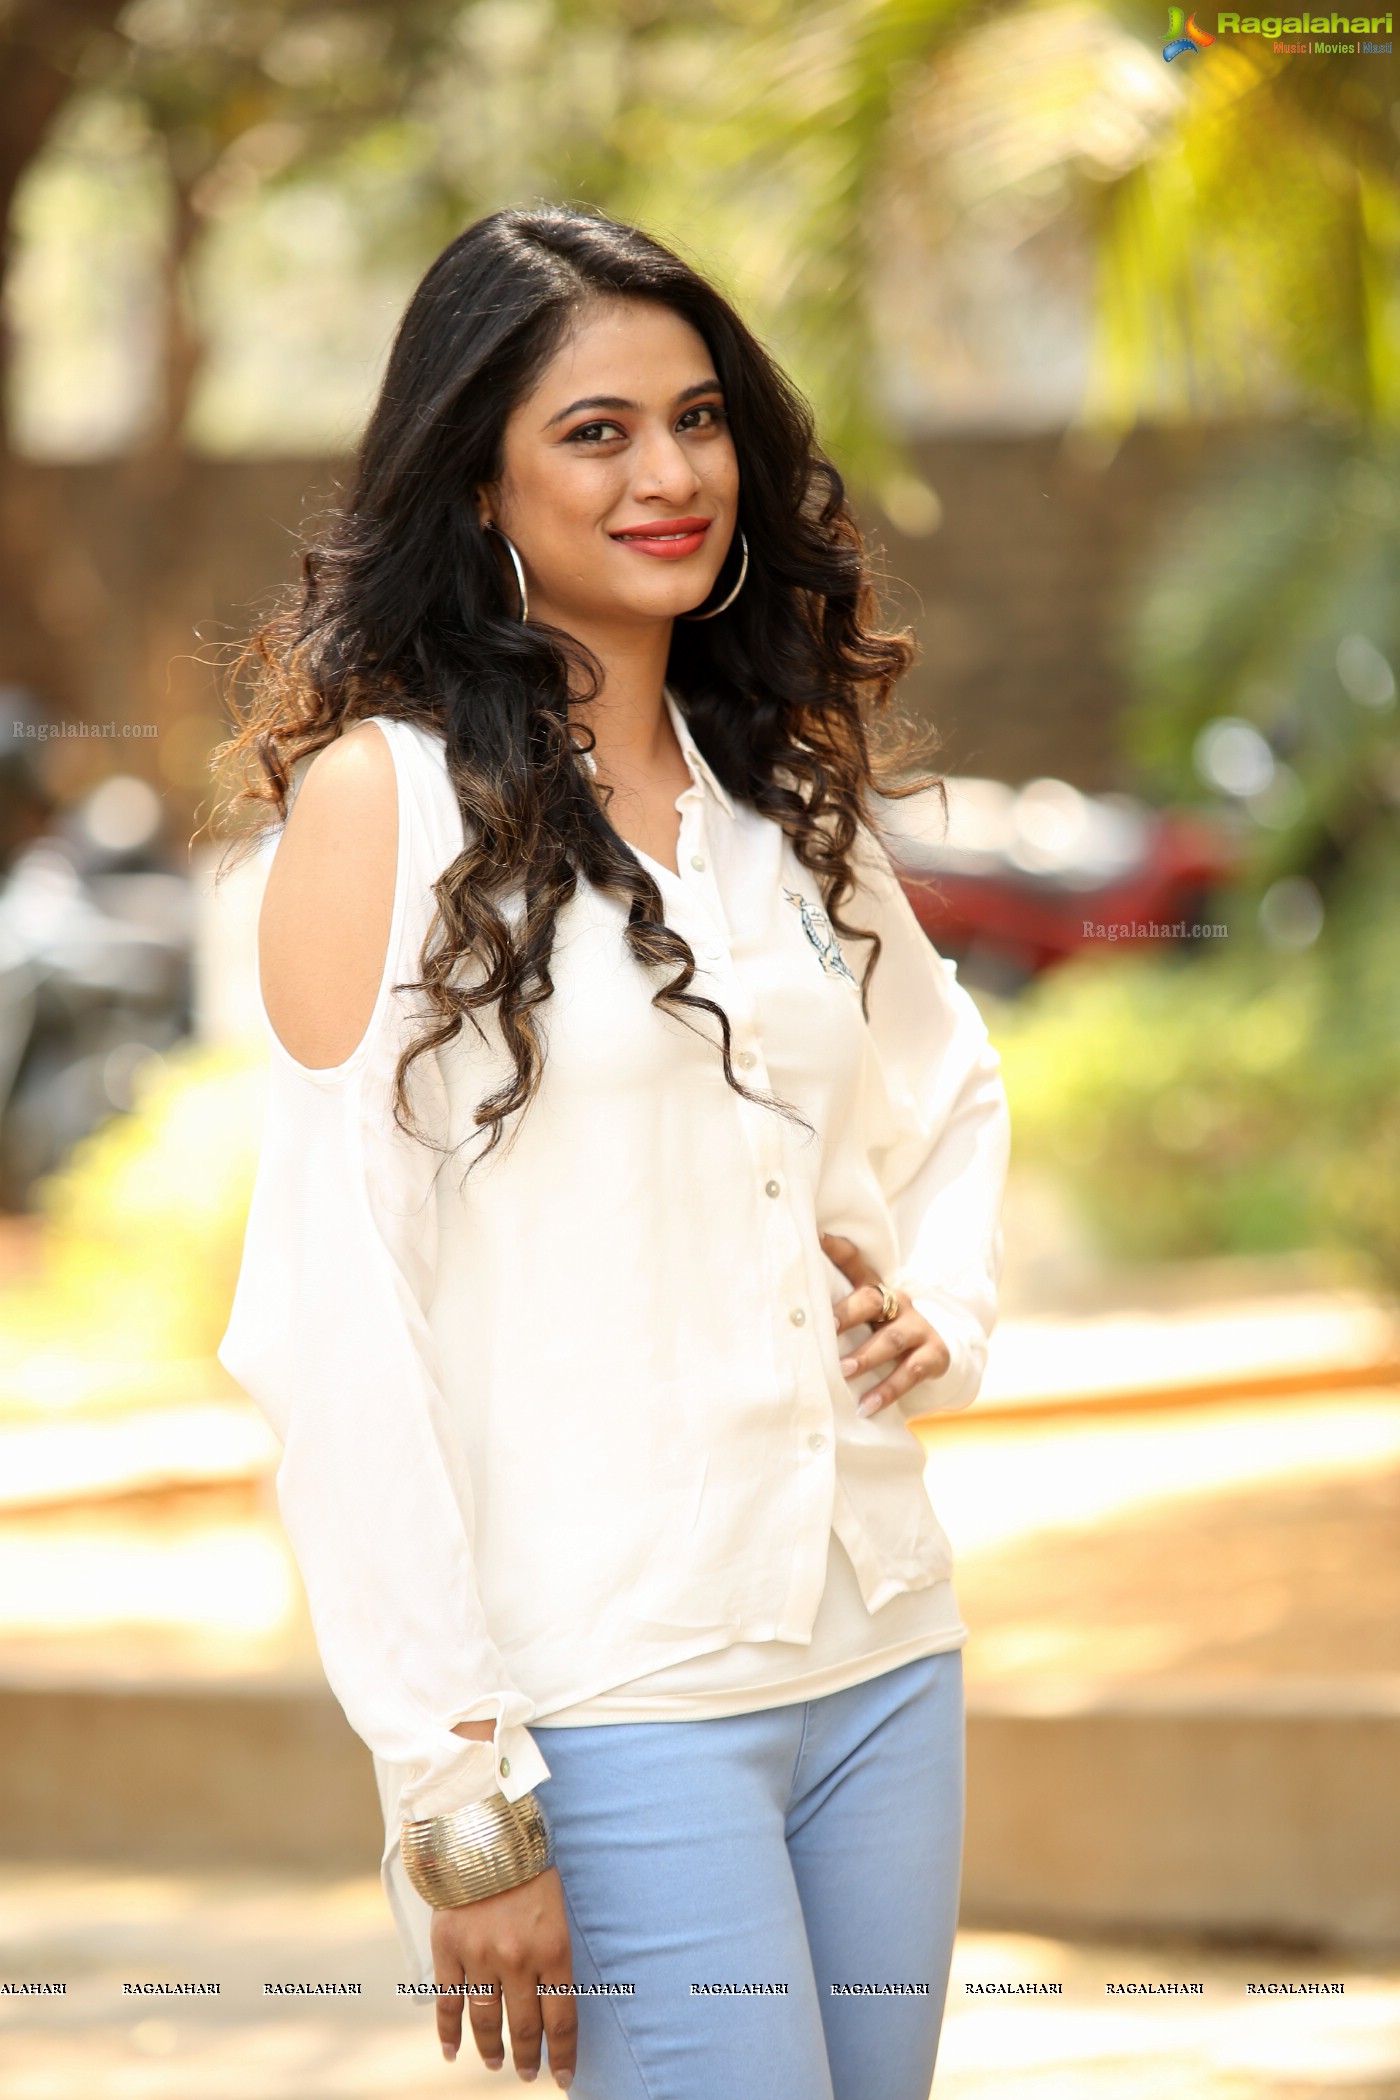 Zara Shah at Aithe 2.0 Pre-Release Event (Posters)